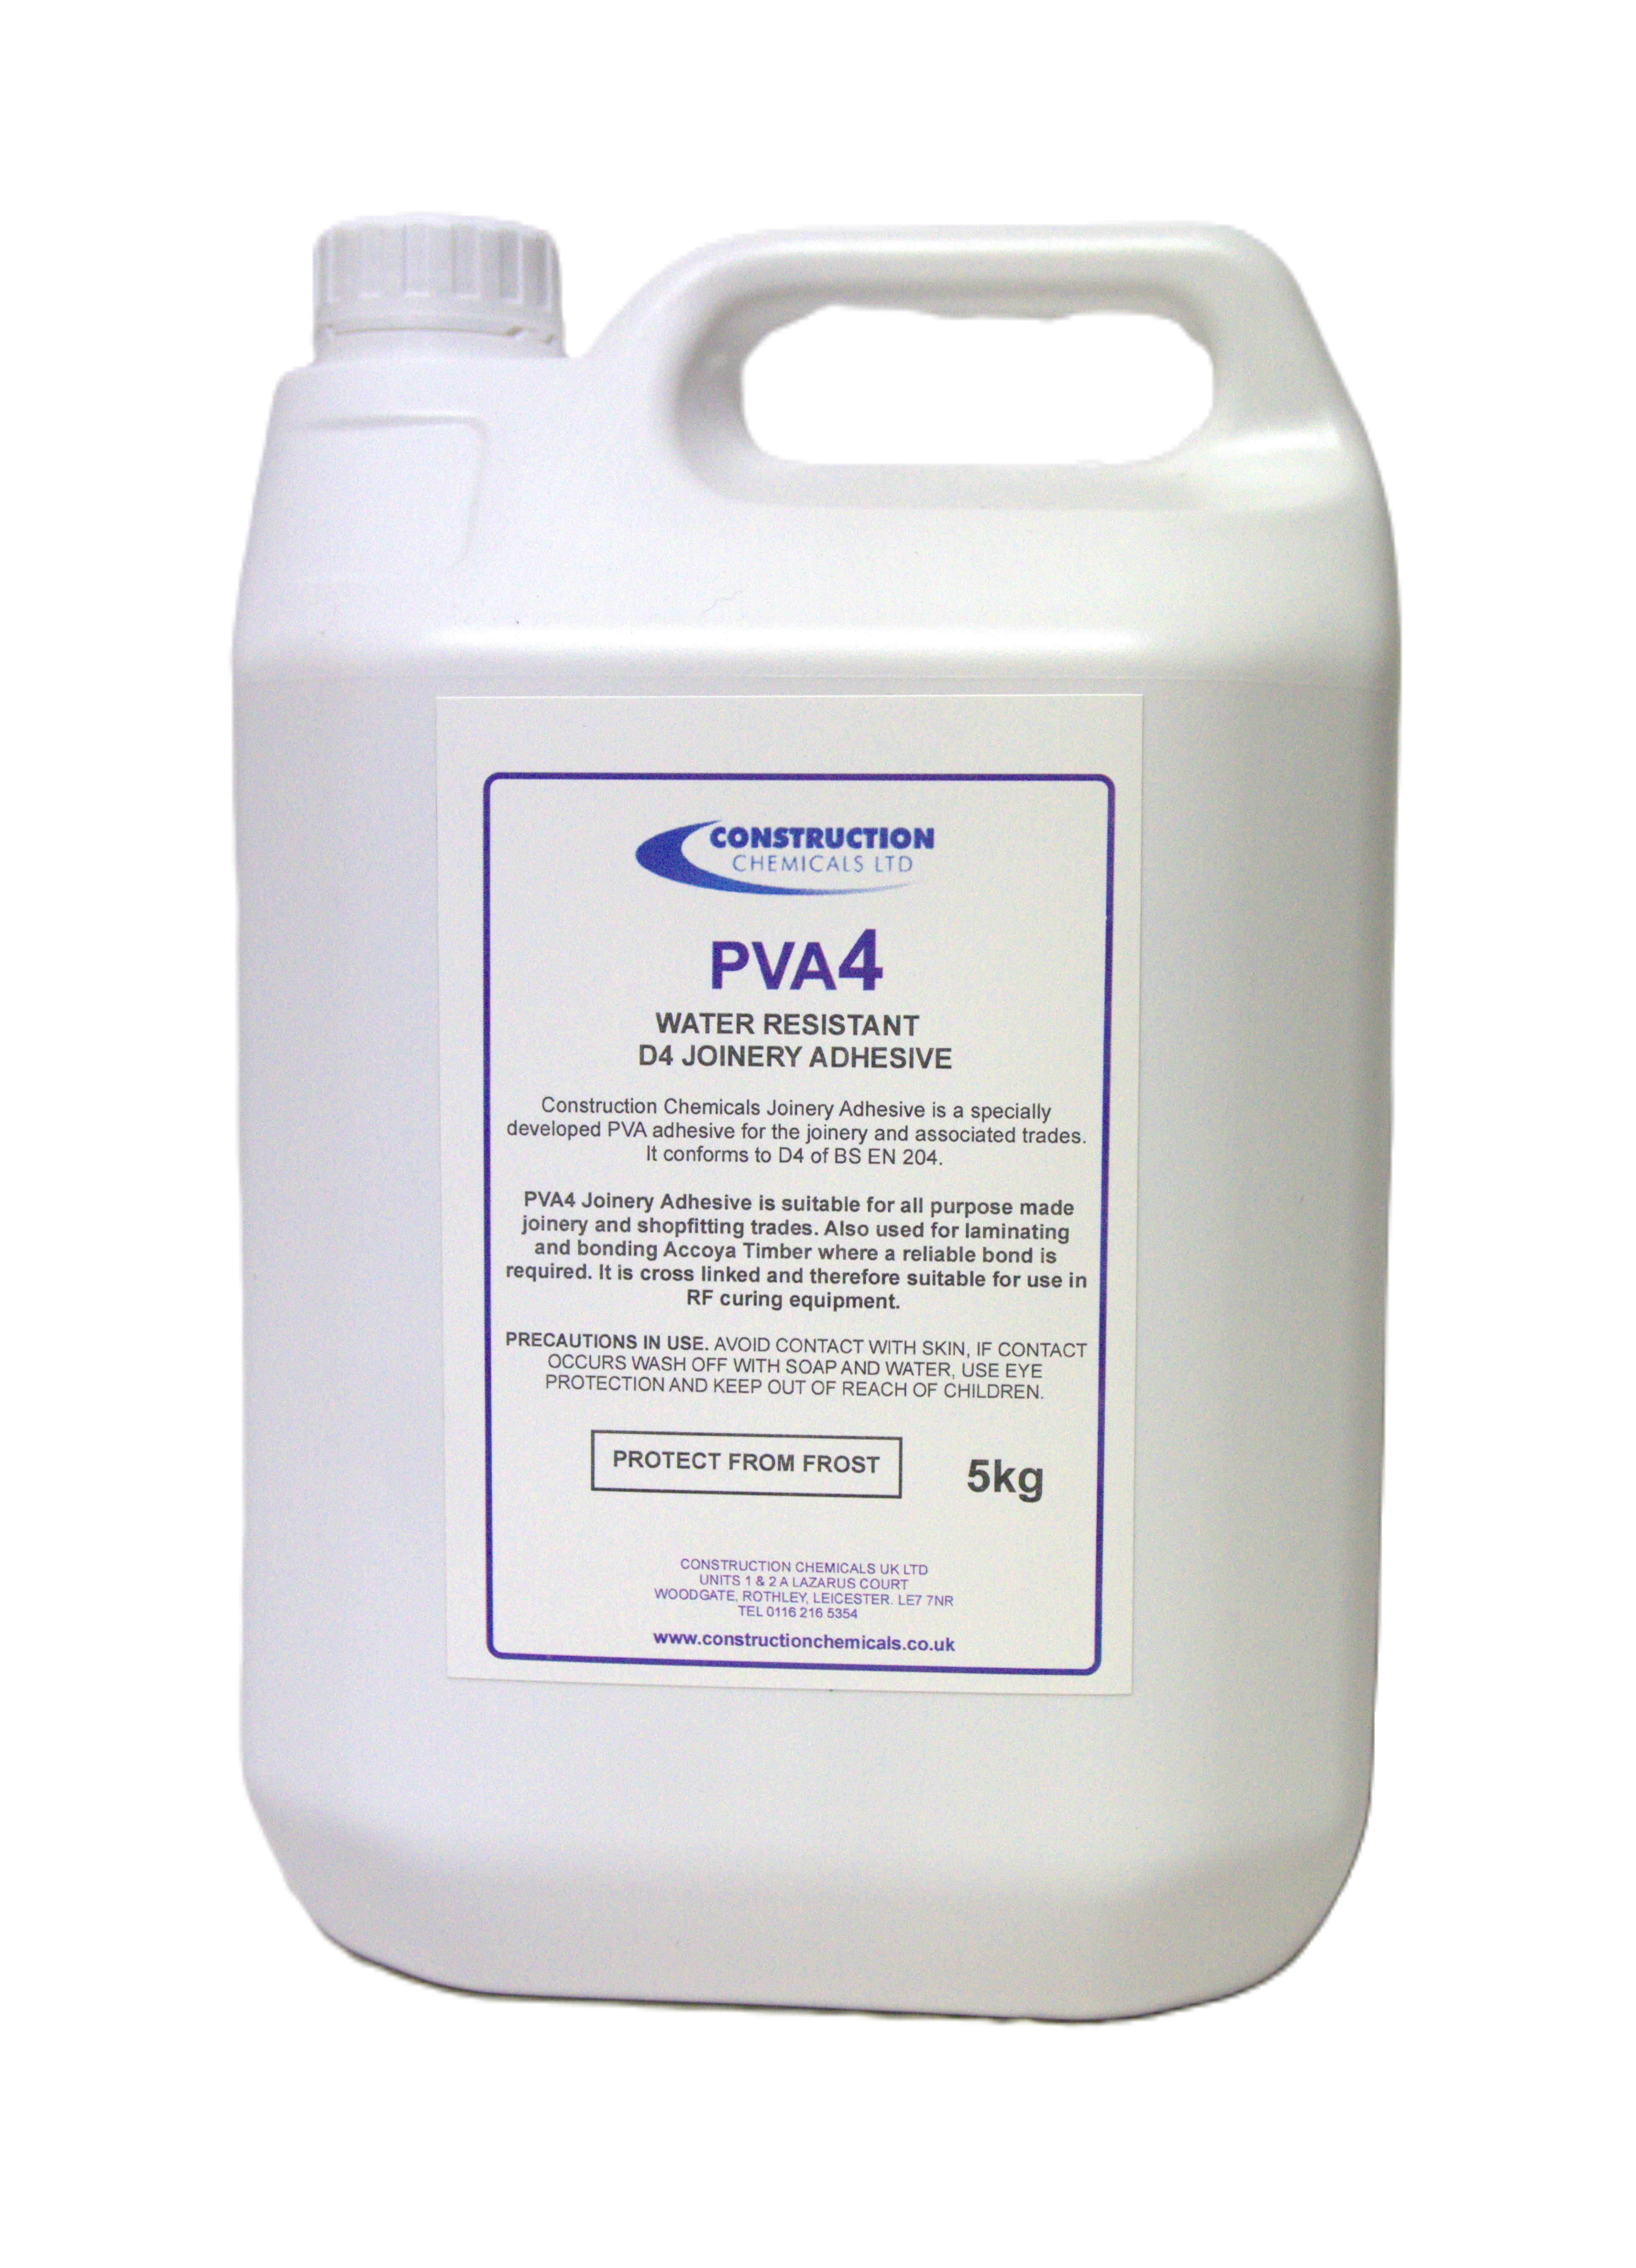 Water-Resistant PVA Joinery Adhesive D4